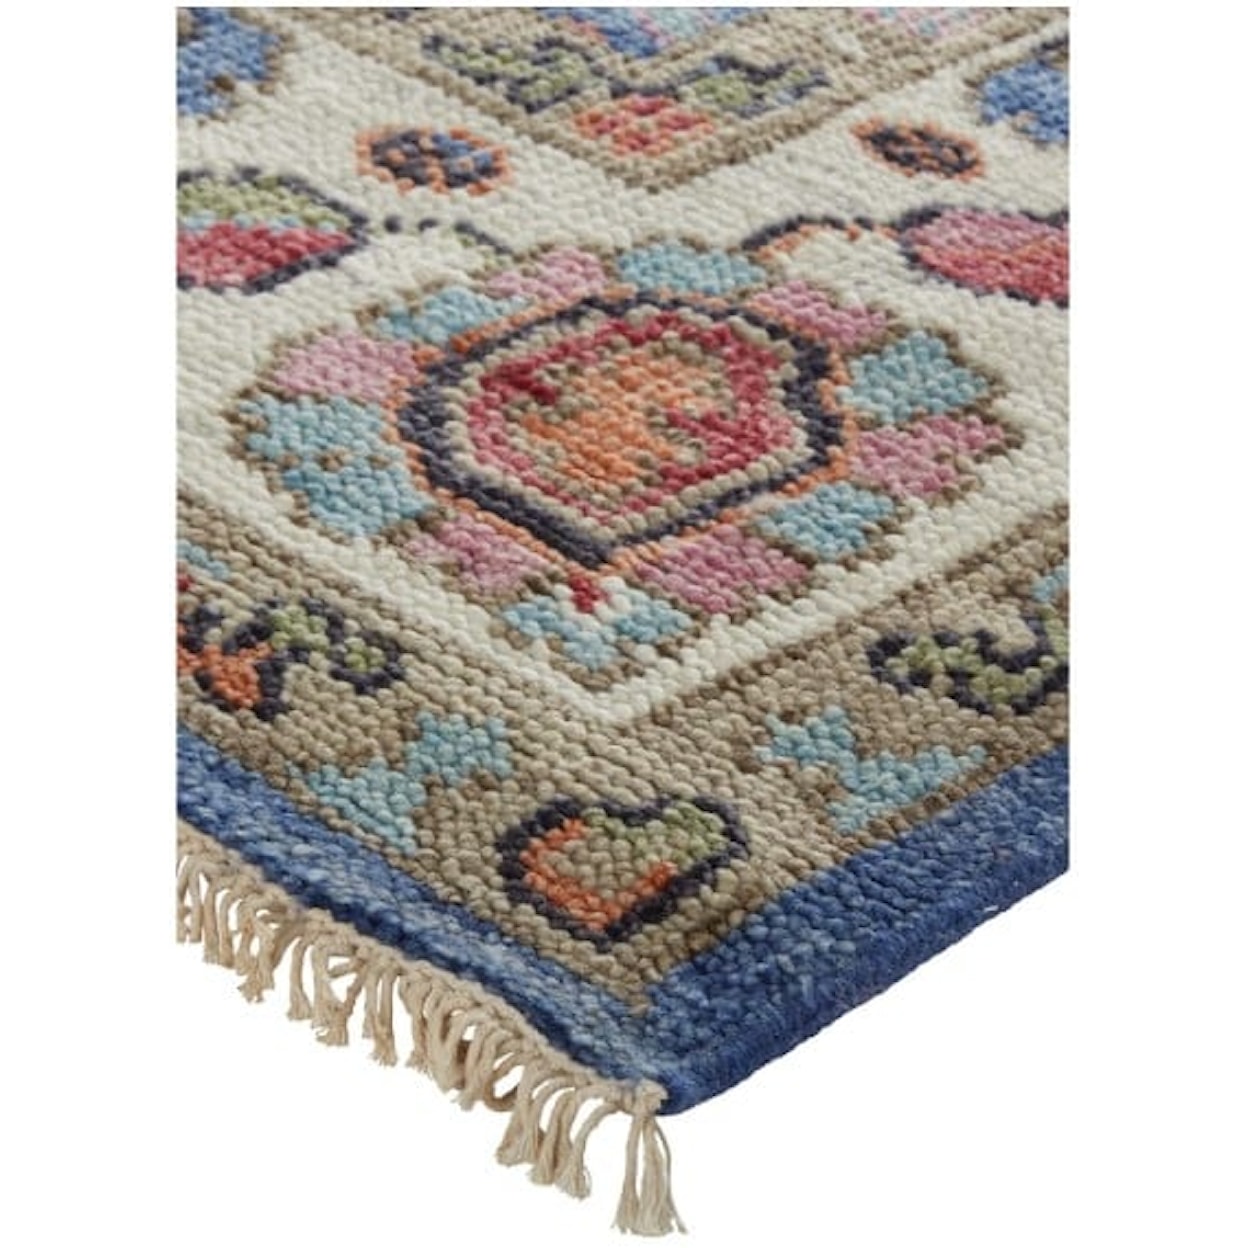 Feizy Rugs Beall BEALL 6708F IN BLUE-MULTI